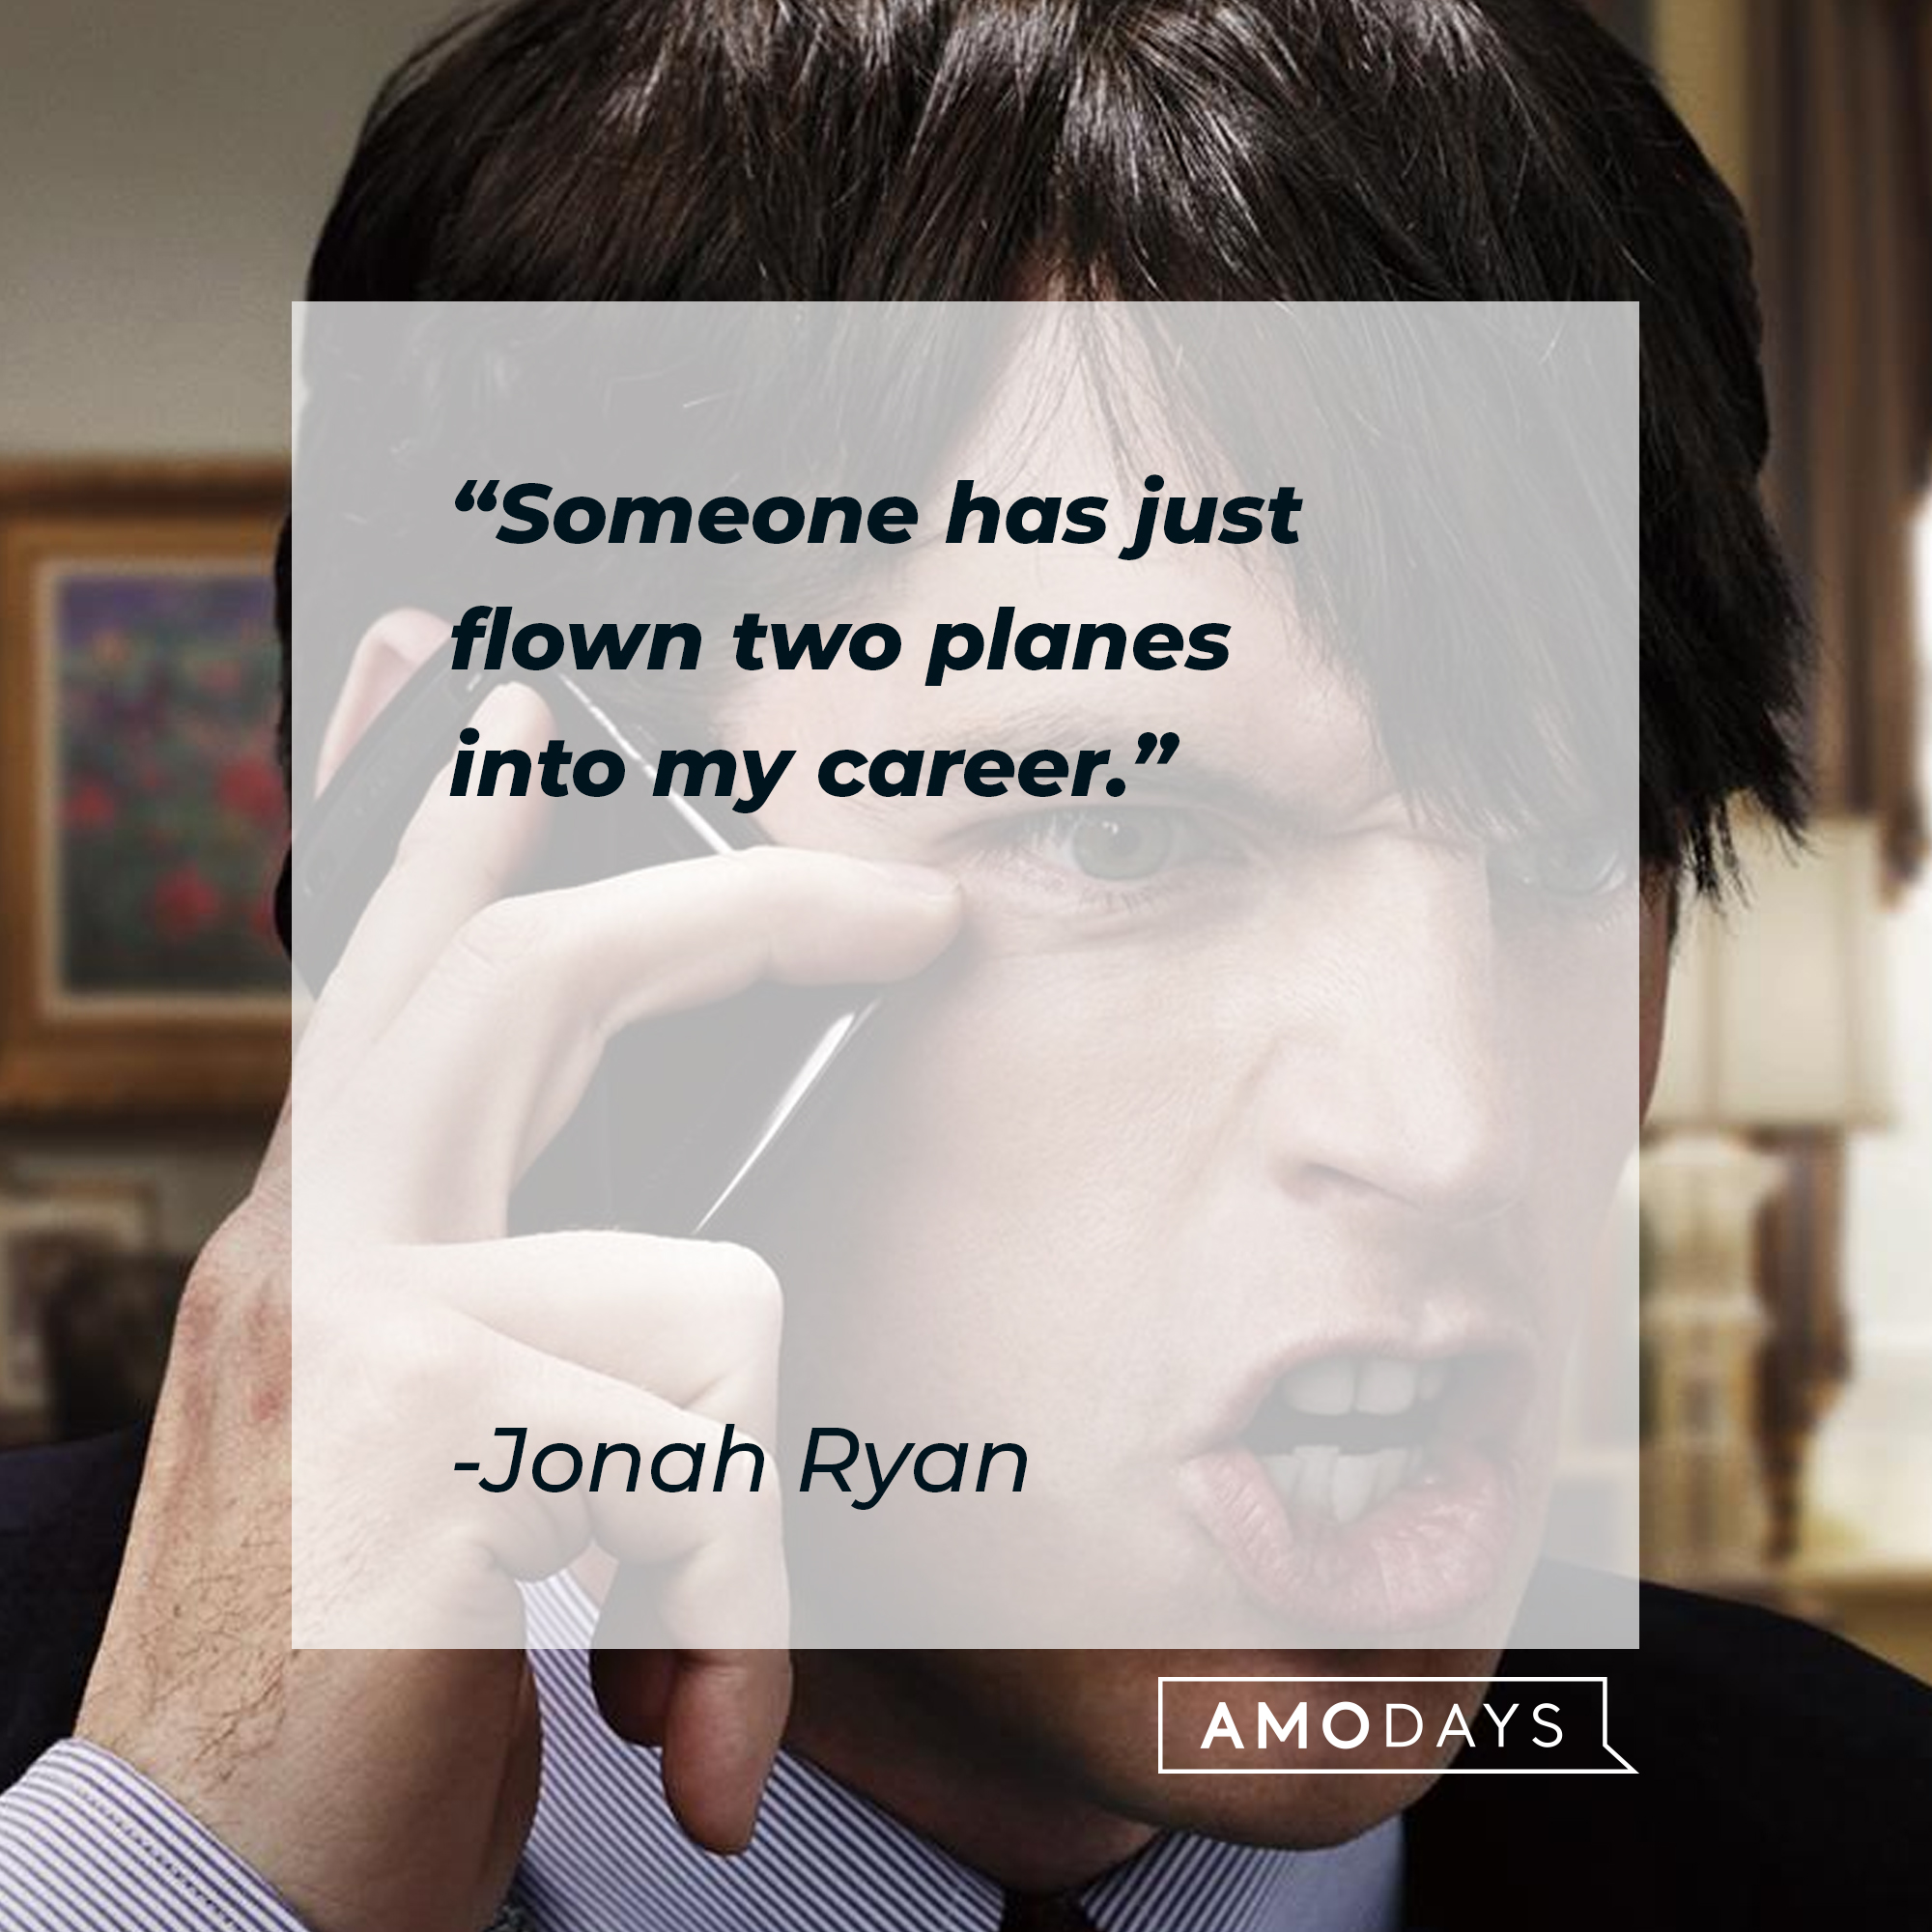 Jonah Ryan, with his quote: “Someone has just flown two planes into my career.” | Source: Facebook.com/veep